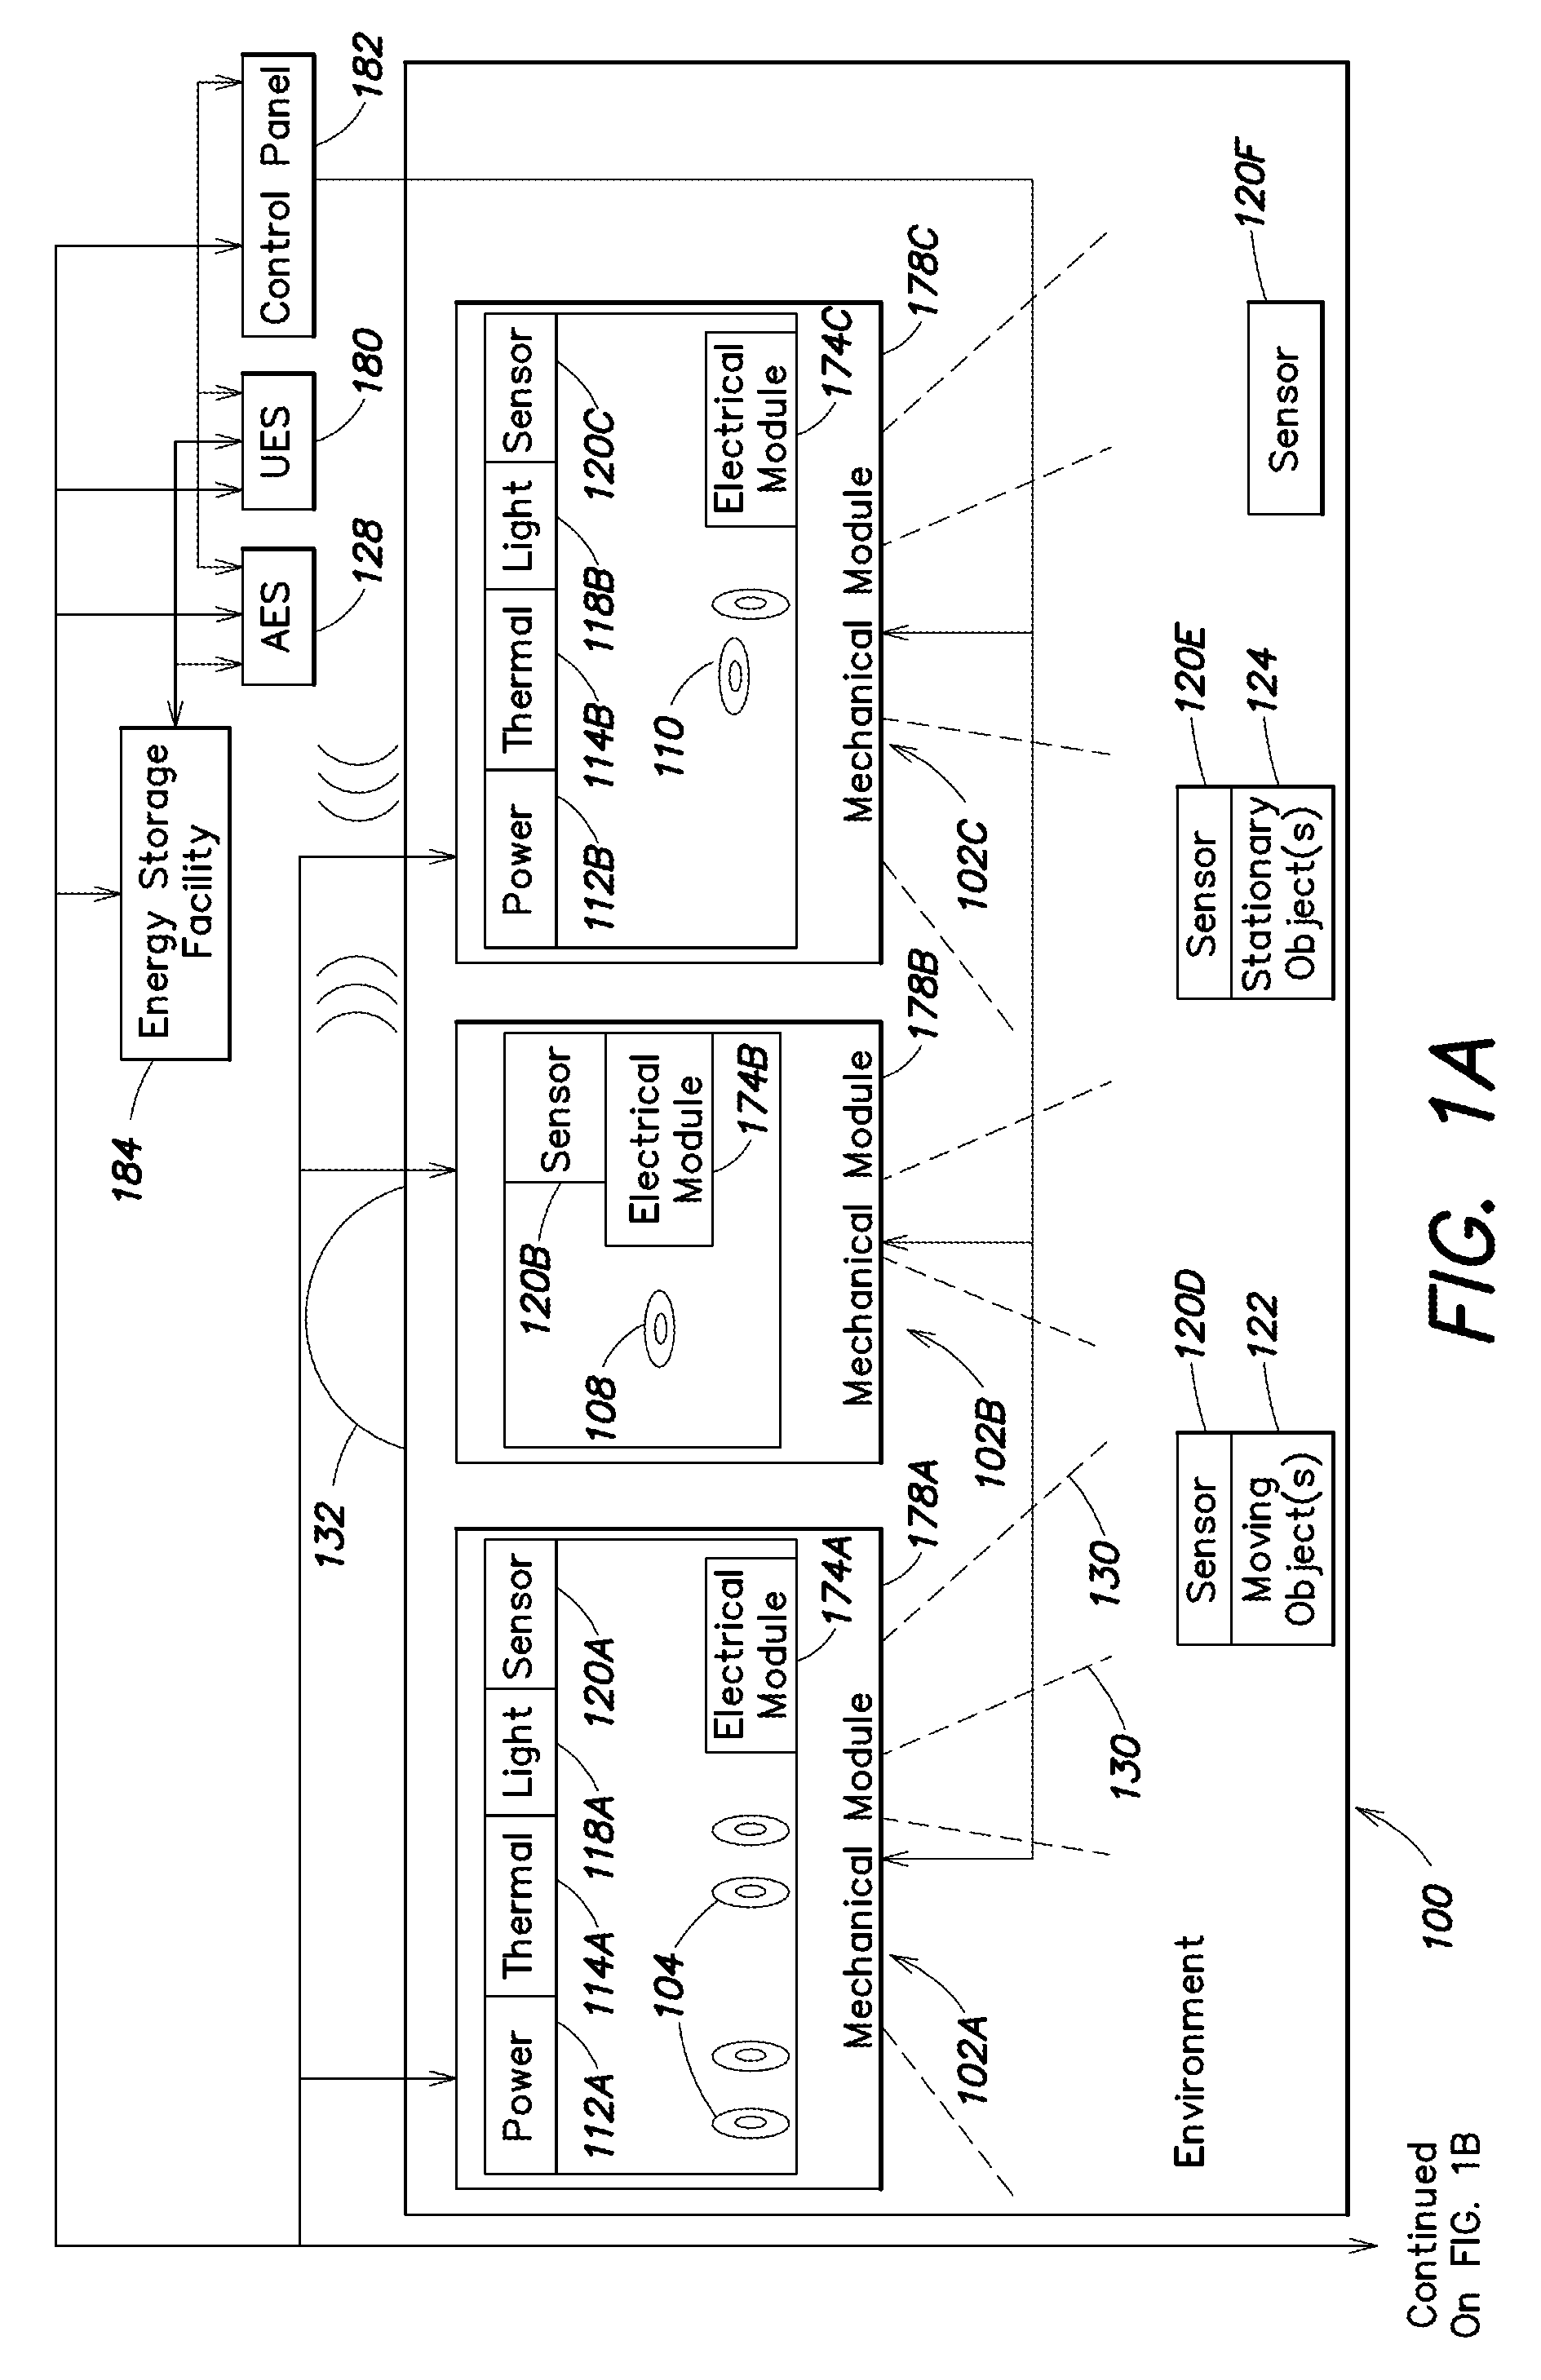 Methods, apparatus, and systems for automatic power adjustment based on energy demand information